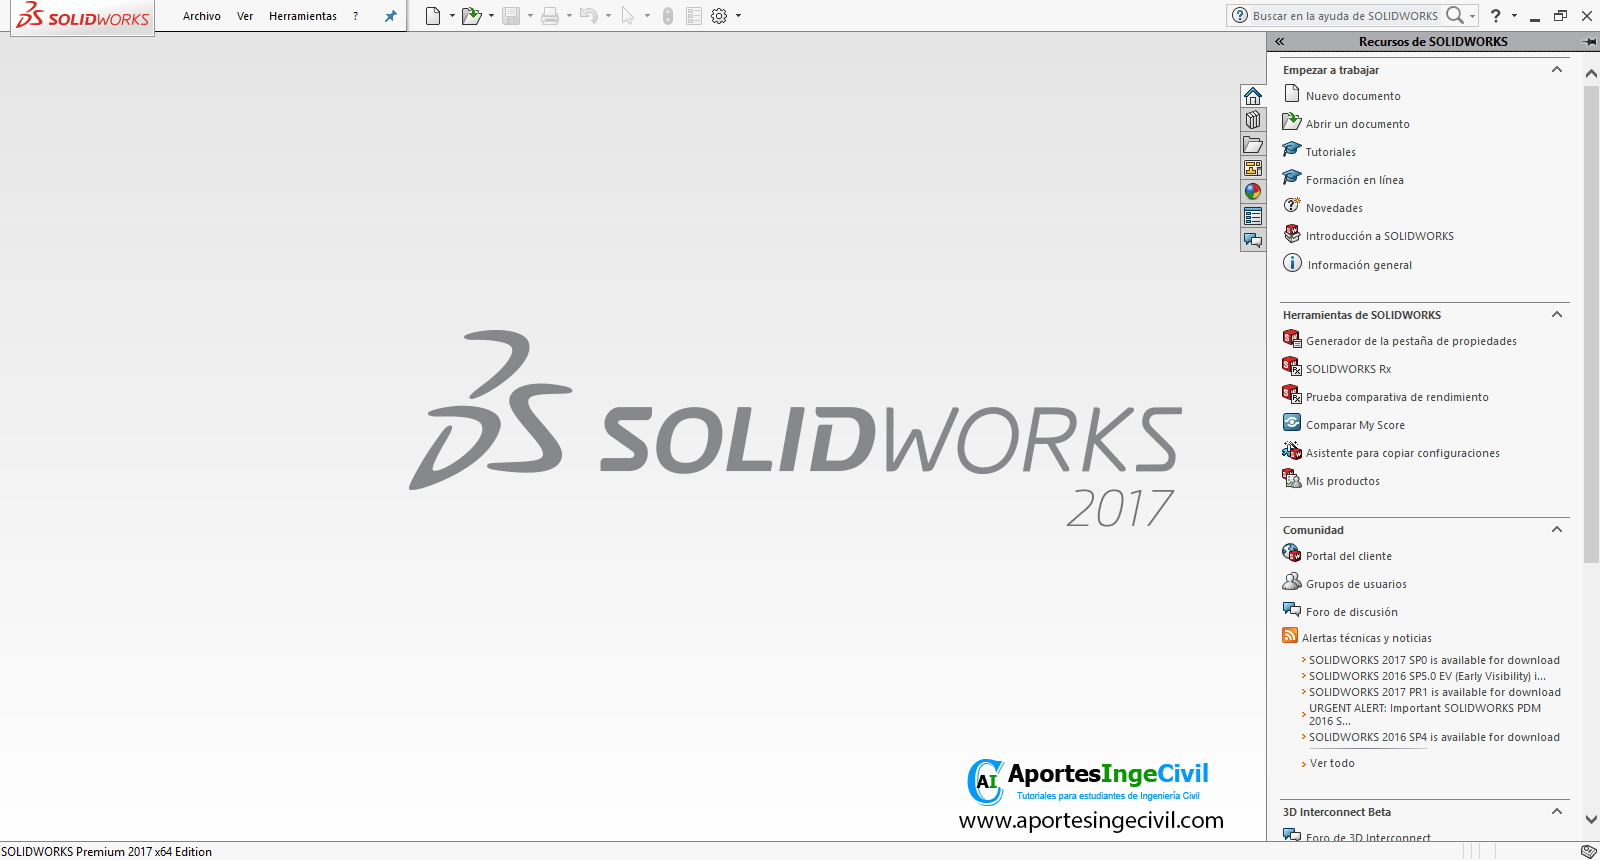 solidworks 2012 64 bit with crack